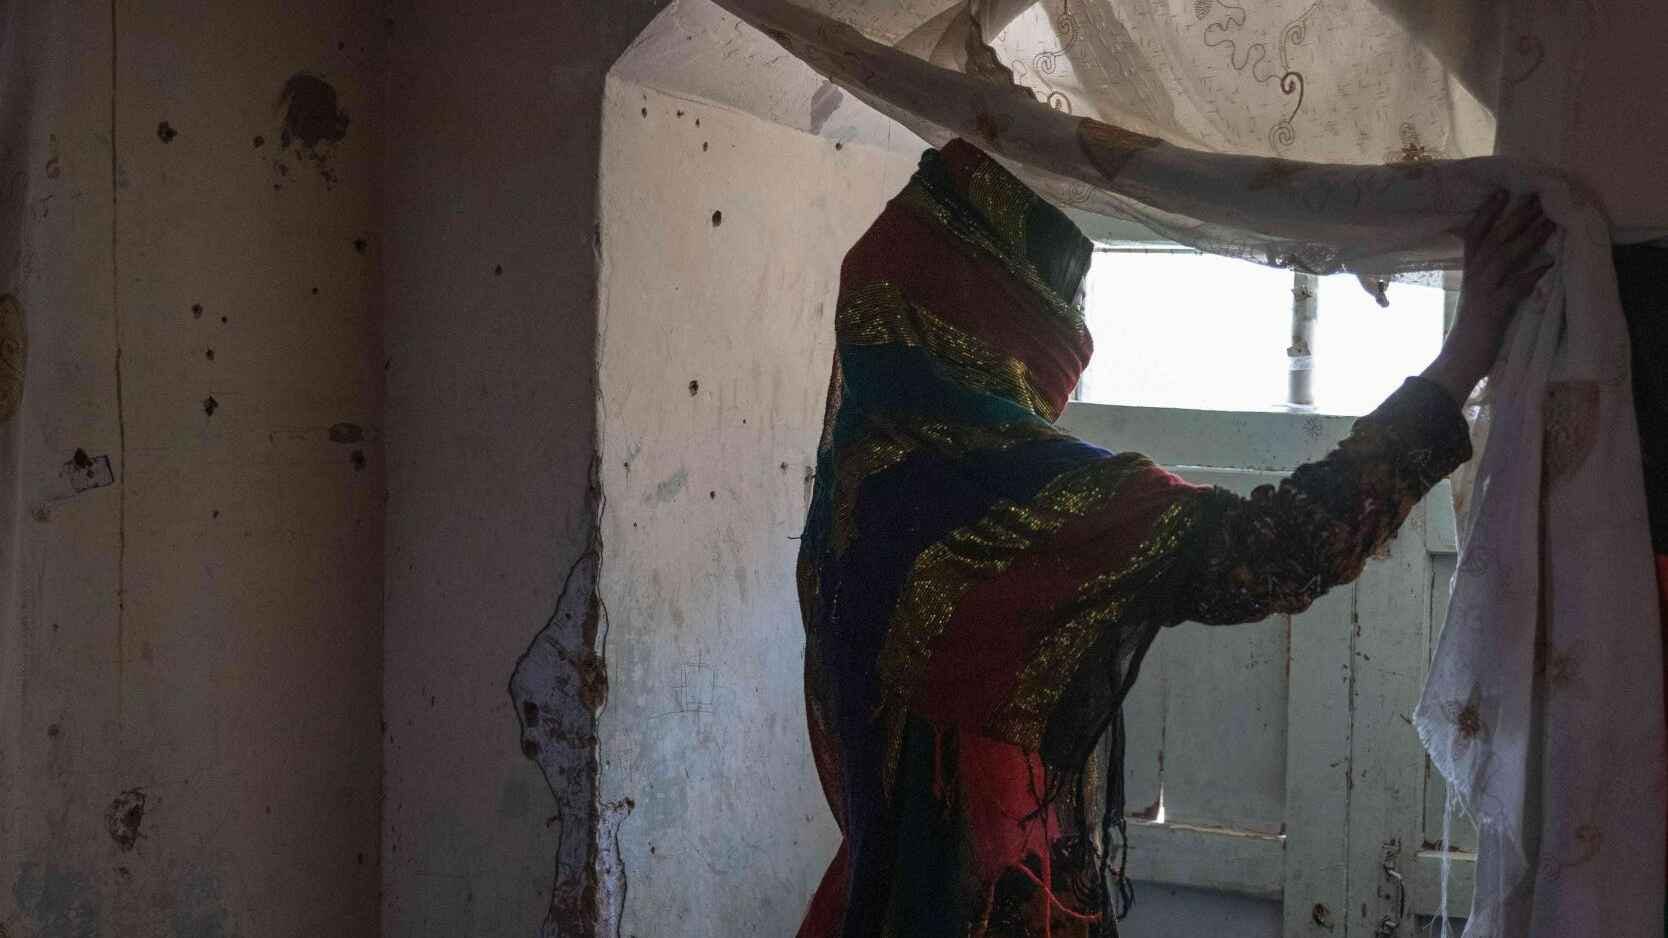 A veiled Afghan woman peers whistfully out the slit above her door.